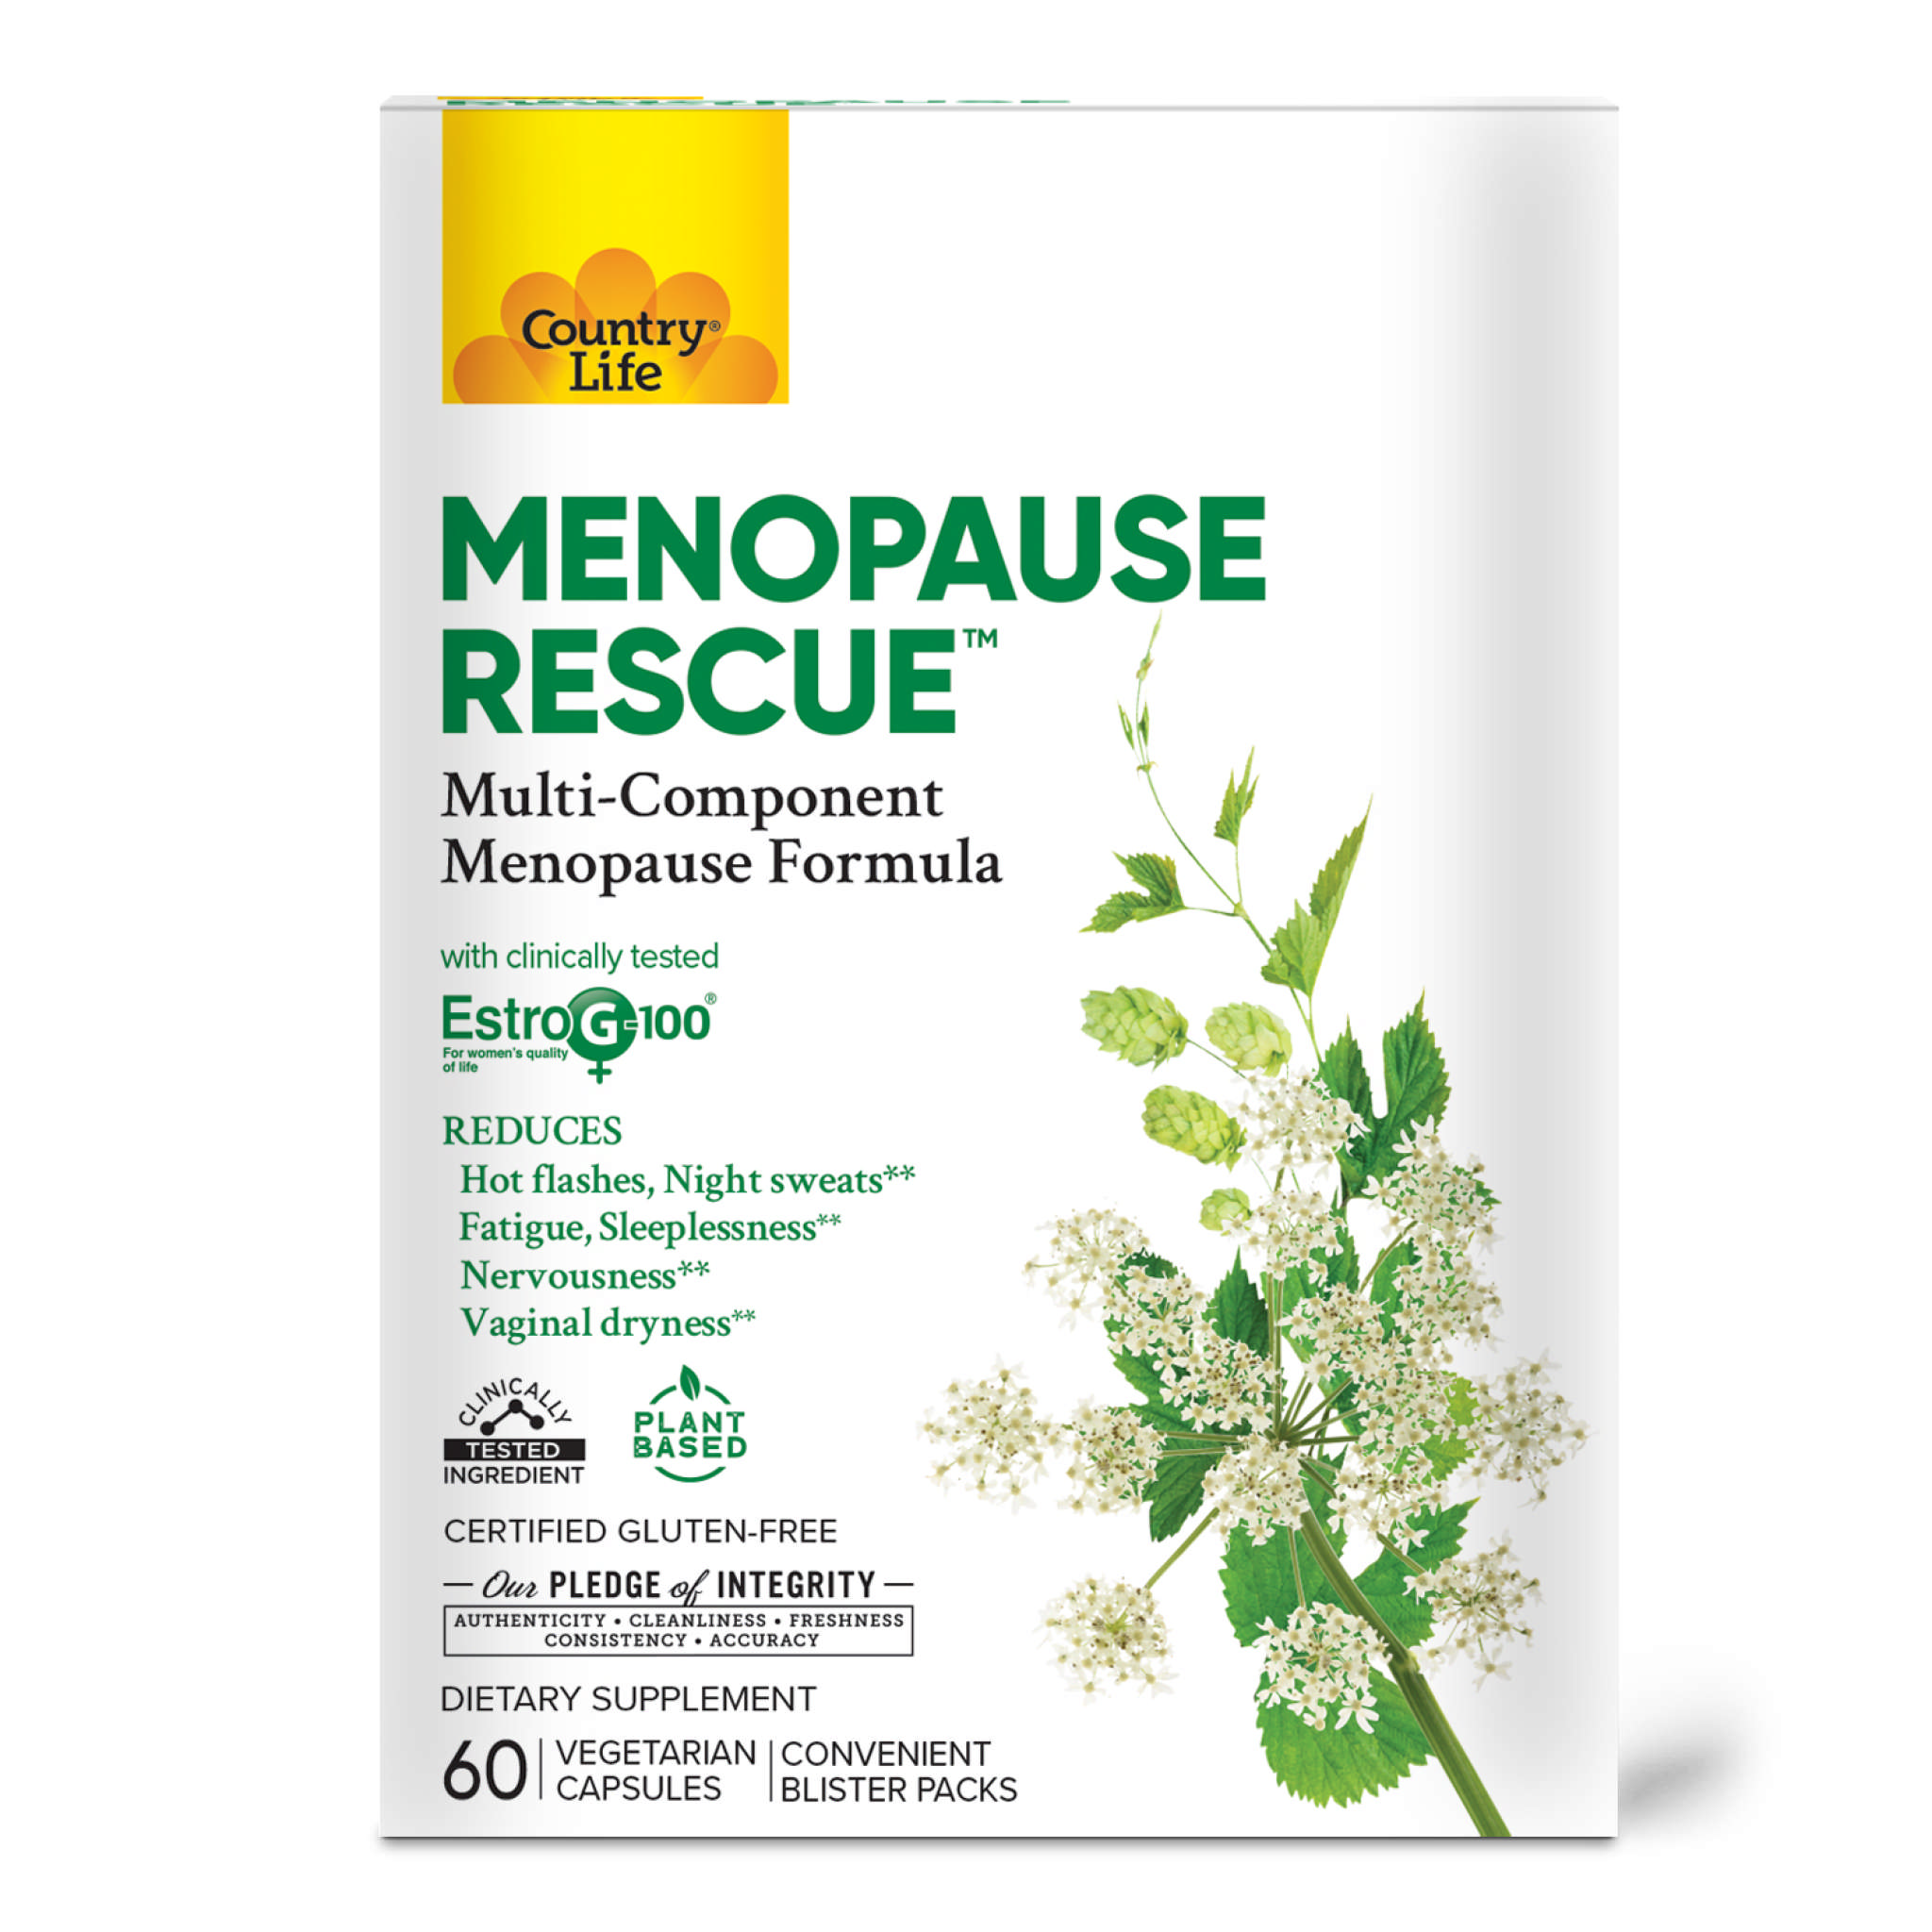 Country Life - Menopause Rescue vCap